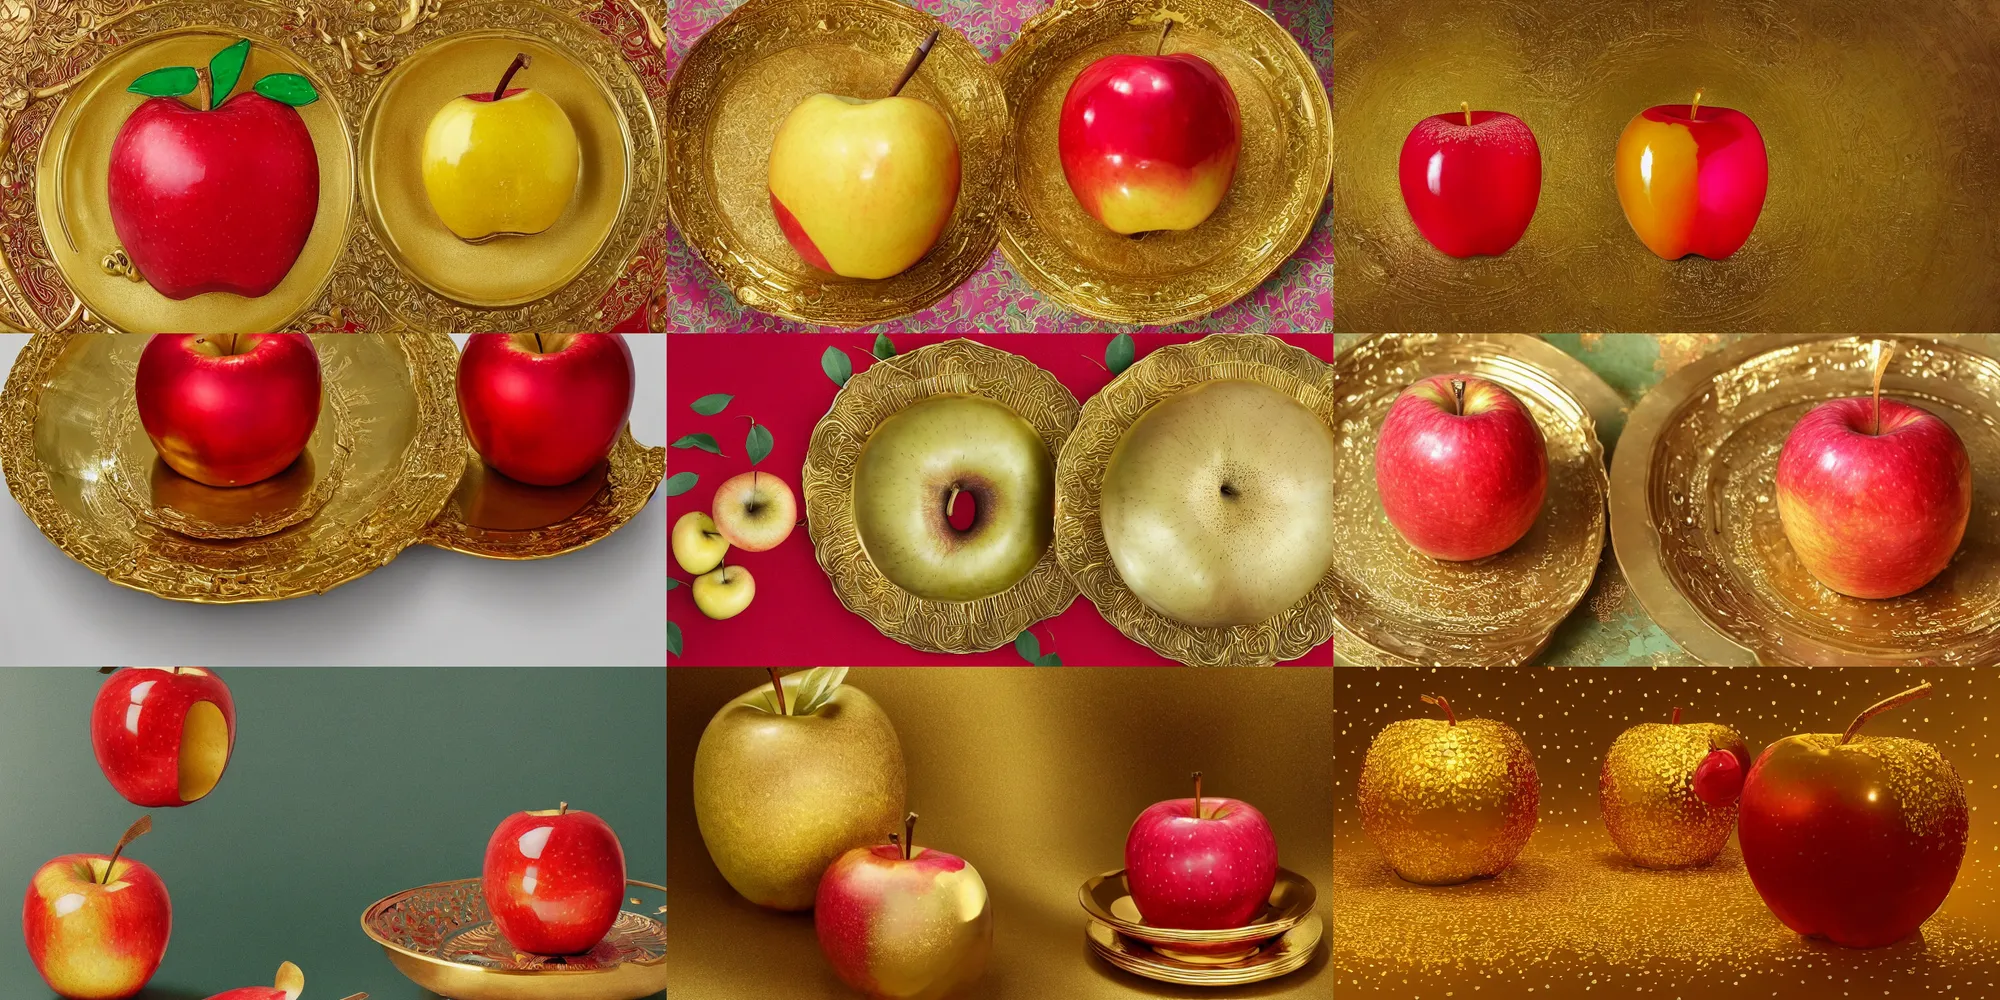 Prompt: A gigantic golden apple sits on a golden plate, its skin shining in the light. The apple is sliced in half, revealing a pink and red center. The plate is decorated with green leaves and a golden apple corer, and the whole thing is set in a golden setting. High details, 8k